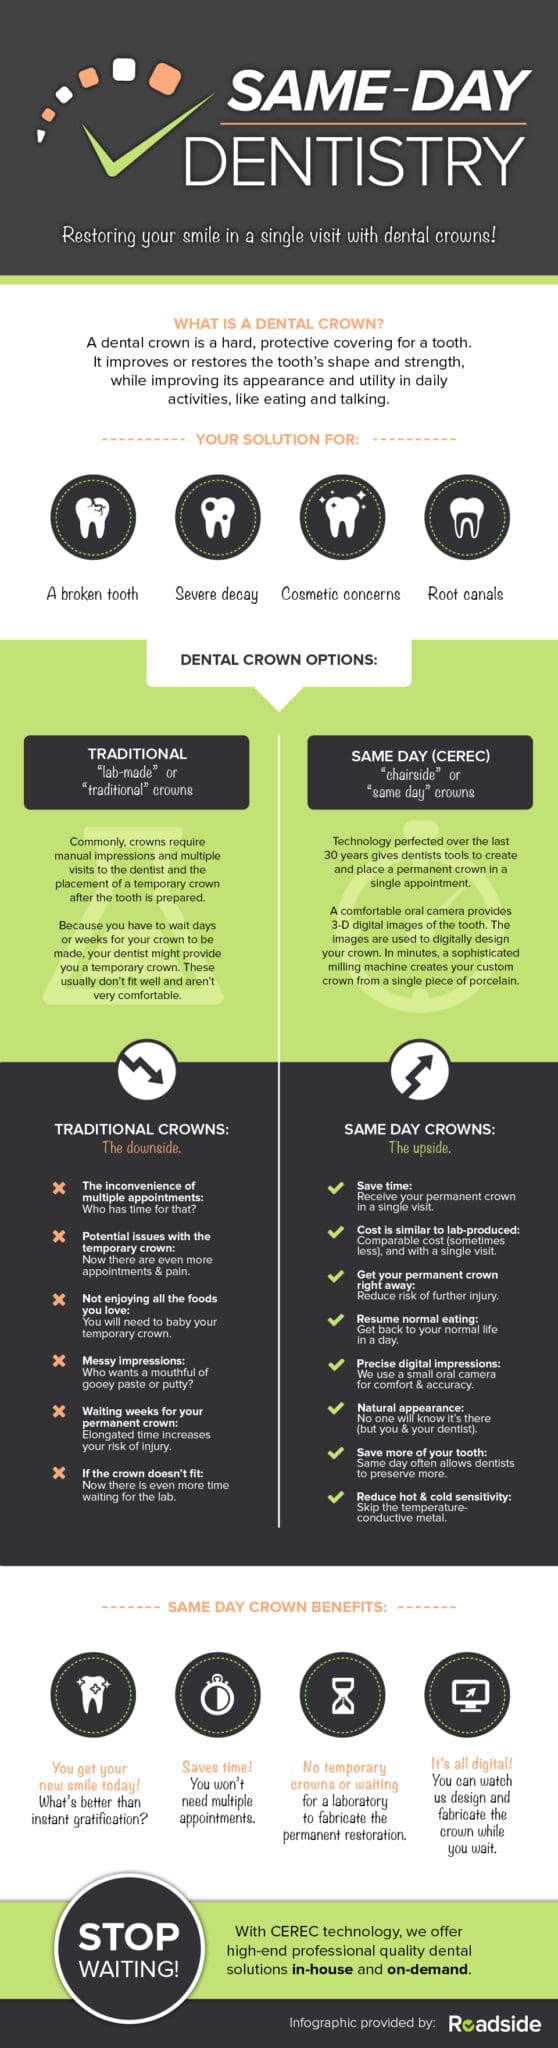 Infographic on same day dentistry